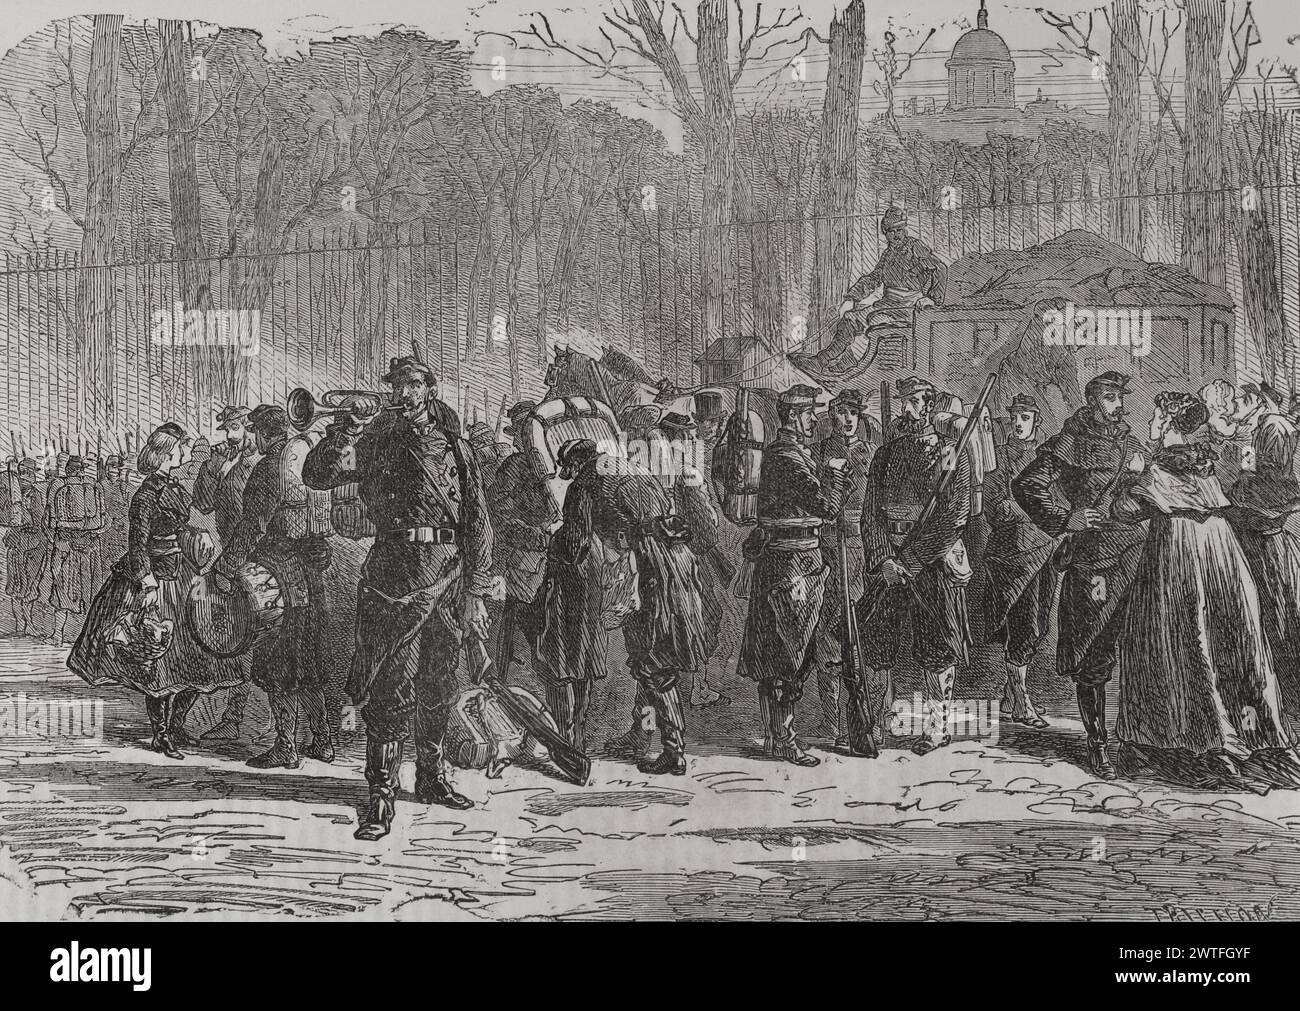 Franco-German War (1870-1871). France. Departure of the 10th regiment of the National Guard for the outposts. Engraving by Trichon. 'Historia de la Guerra de Francia y Prusia' (History of the War between France and Prussia). Volume II. Published in Barcelona, 1871. Author: Auguste Trichon (1814-1898). French engraver. Stock Photo